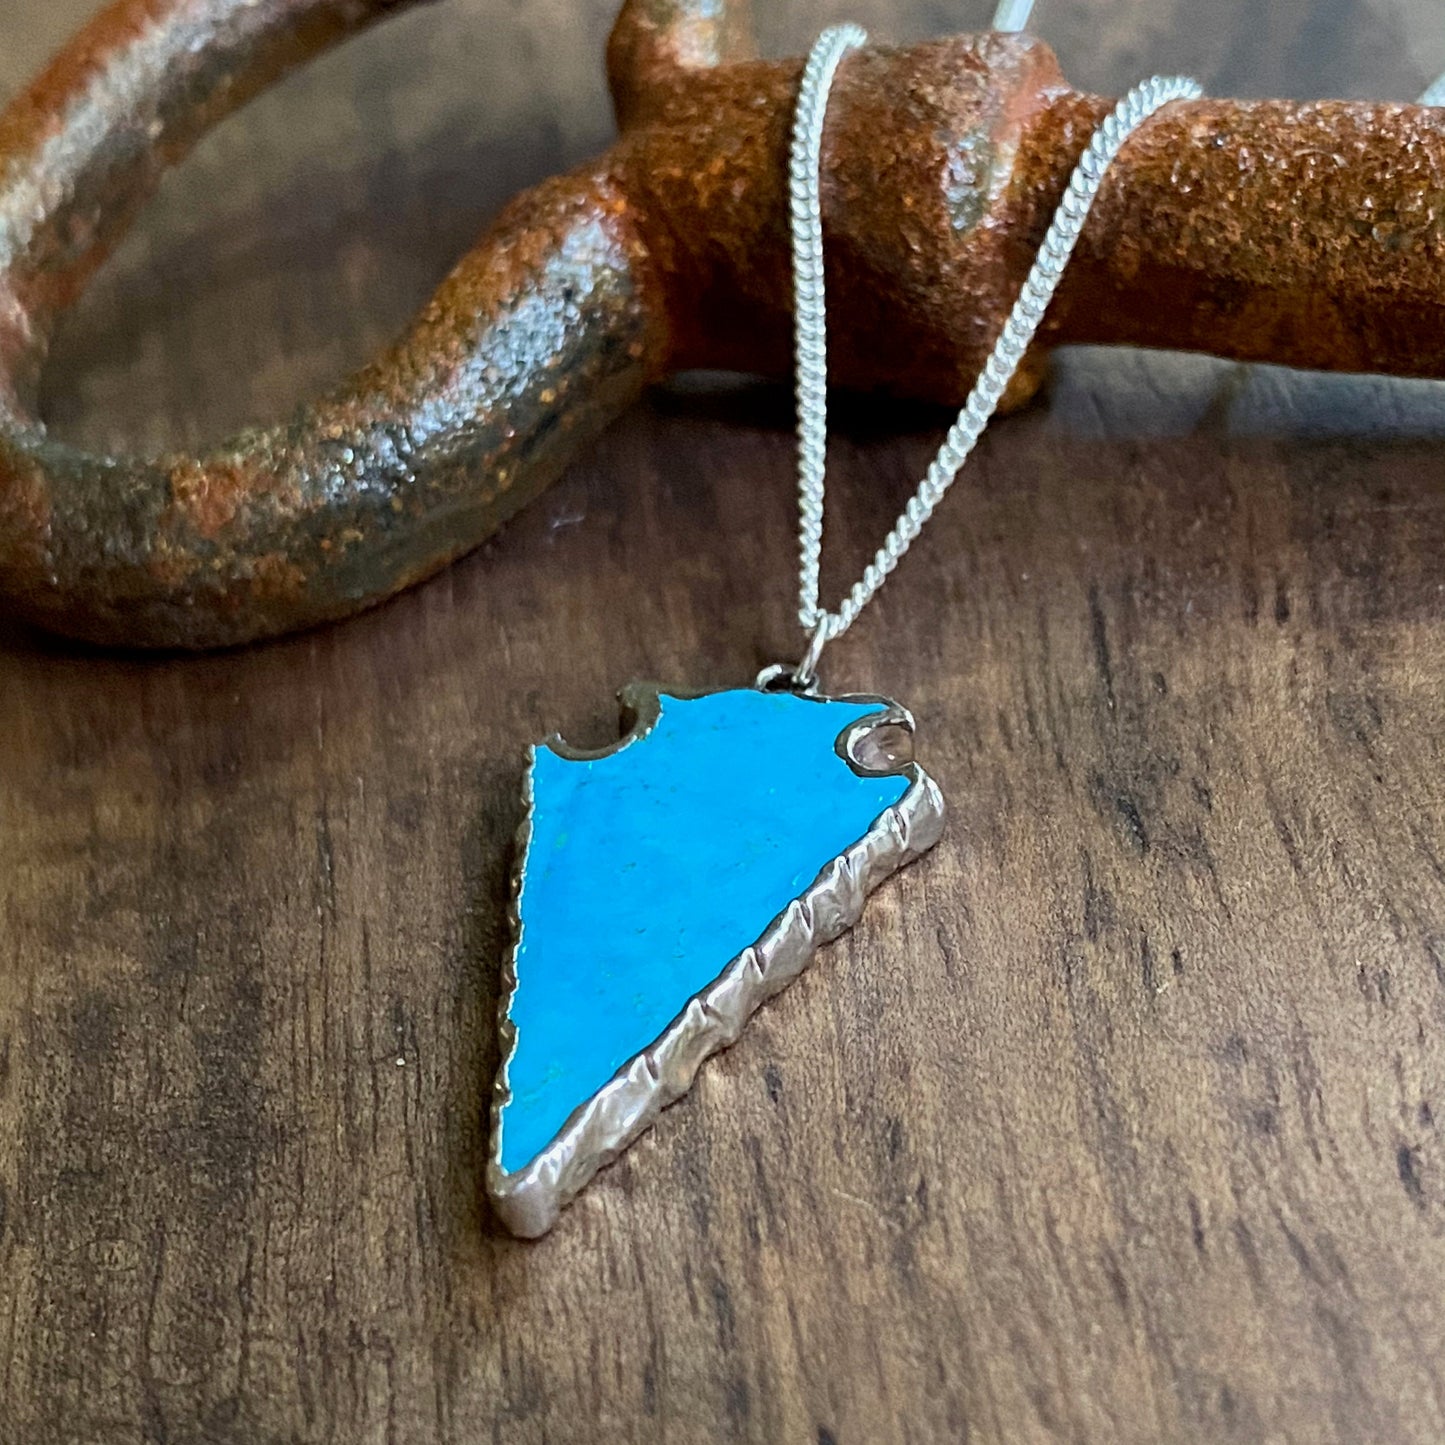 Turquoise Necklace Silver, Arrowhead Necklace,Stone Arrowhead Silver, Blue Stone Necklace,Raw Stone Necklace, Turquoise Pendant Necklace